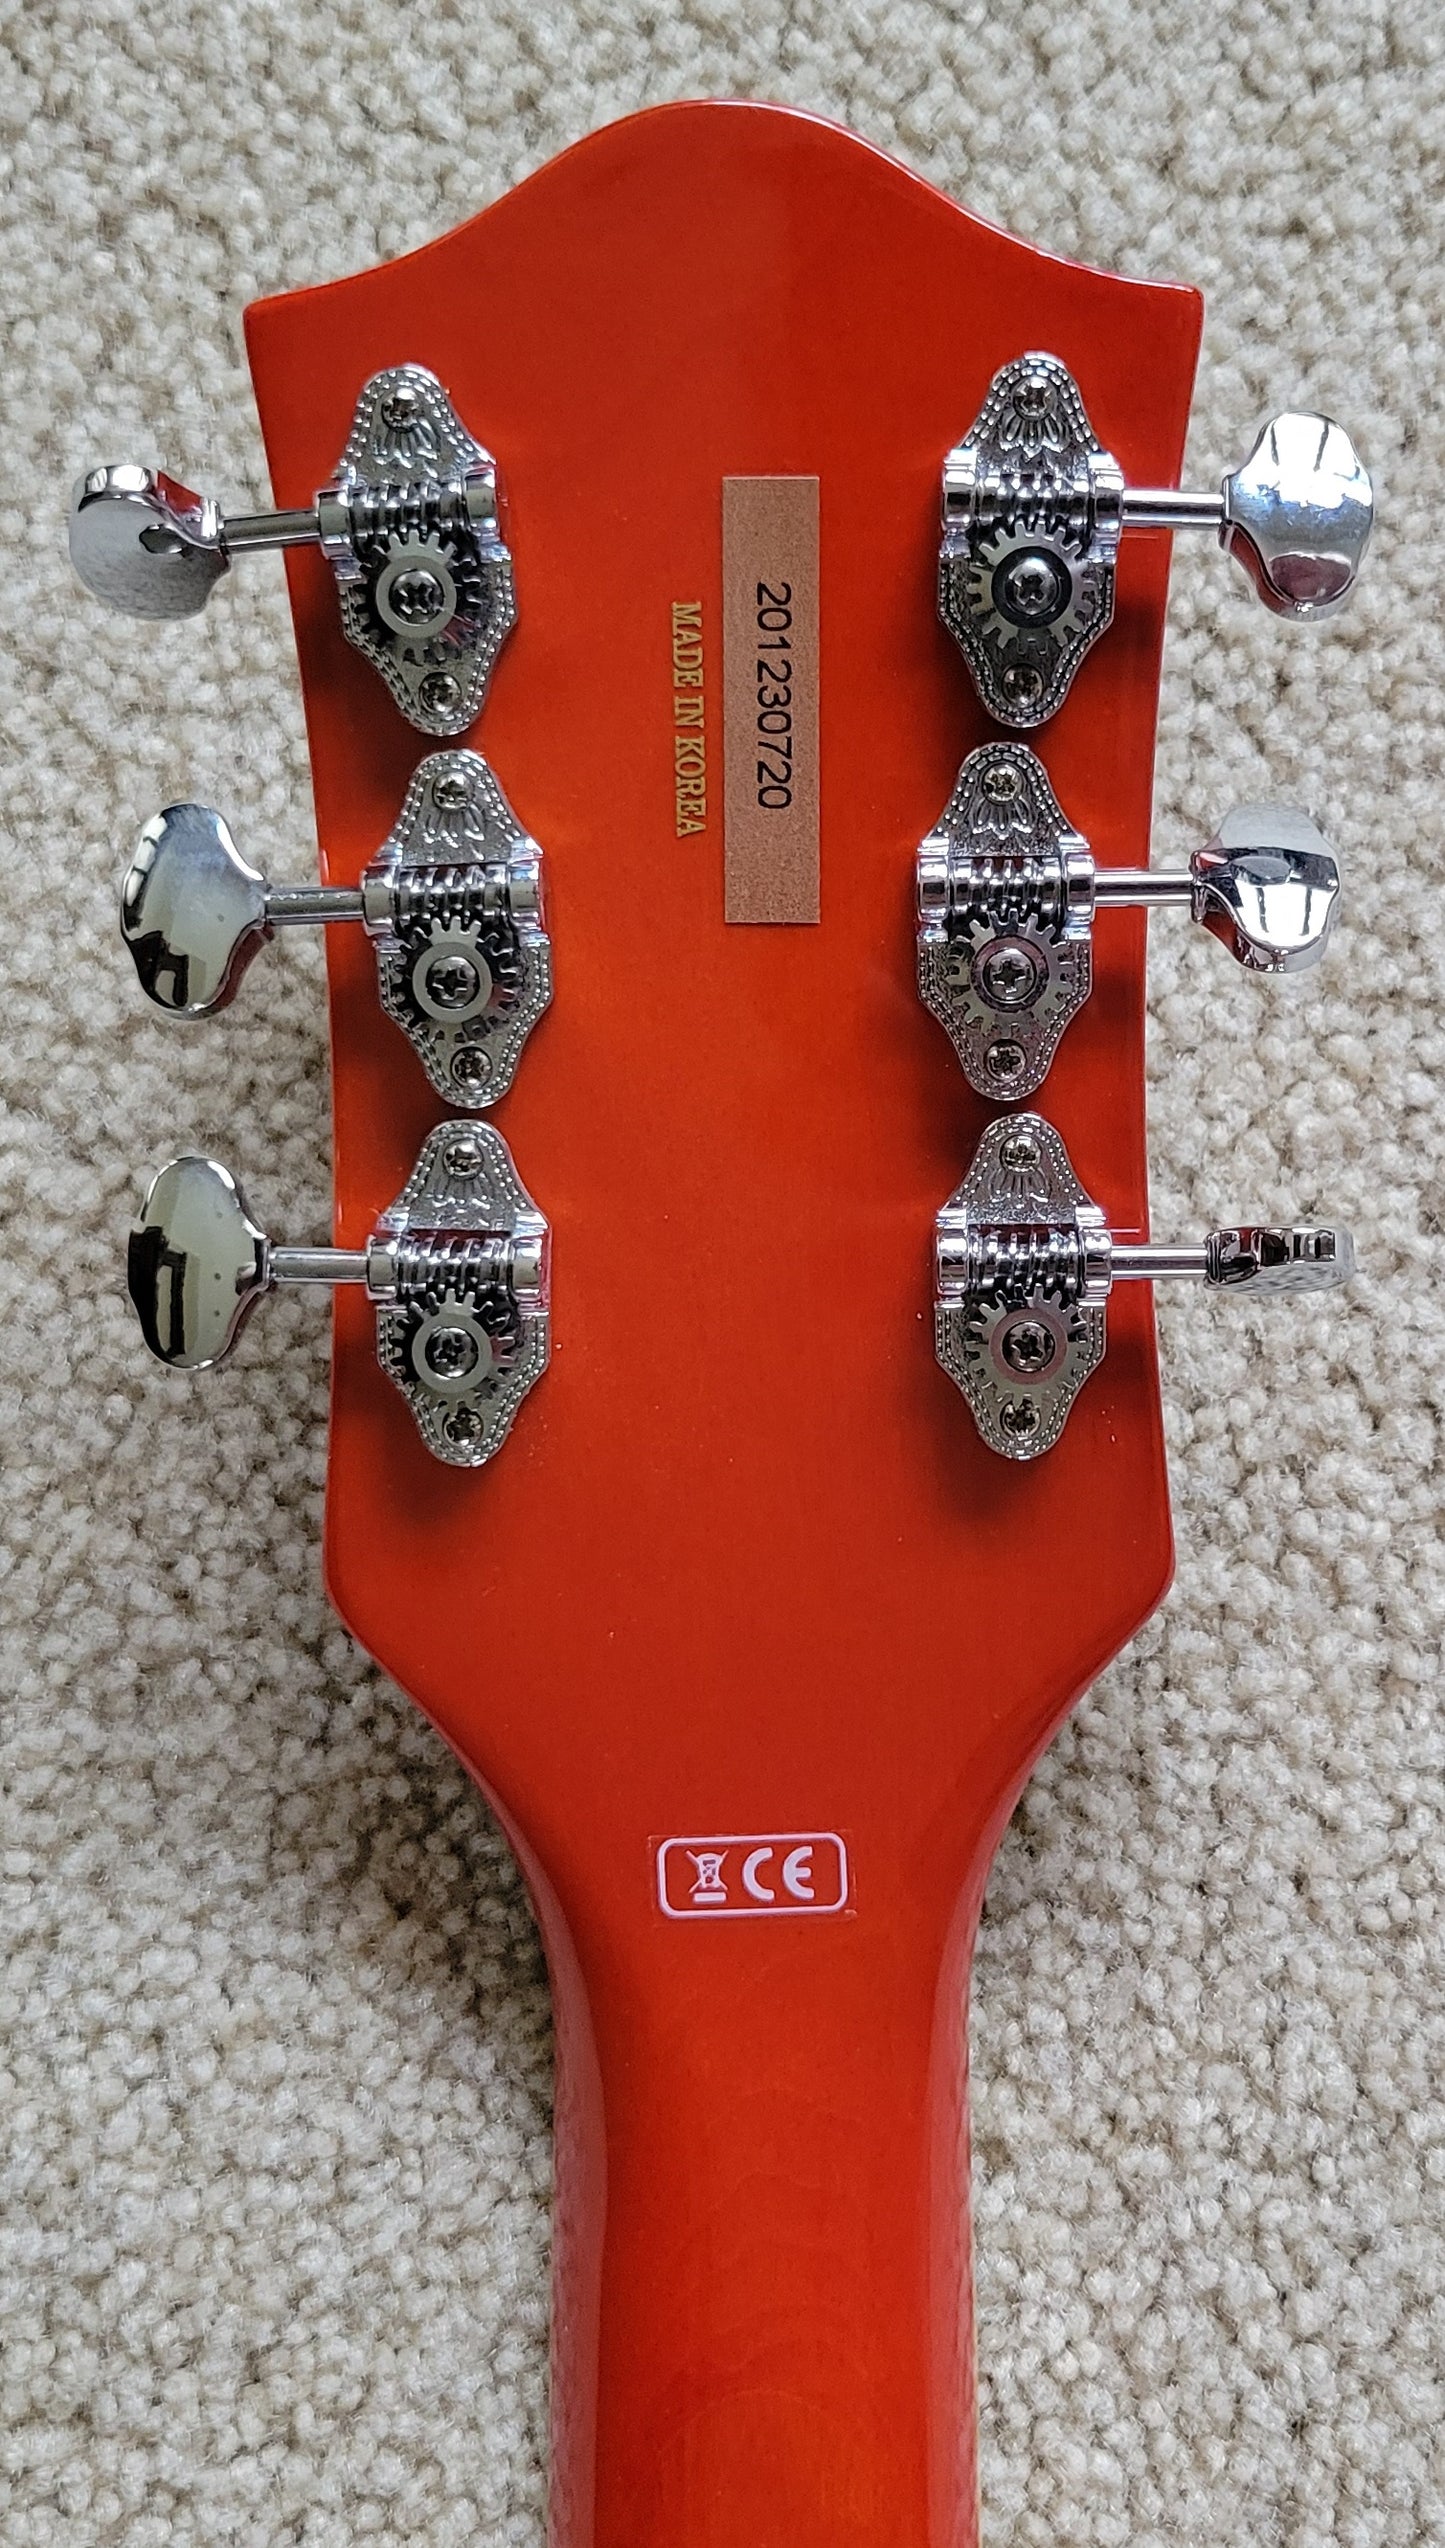 Gretsch G5420T Electromatic Hollow Body Electric Guitar, Bigsby, Orange Stain